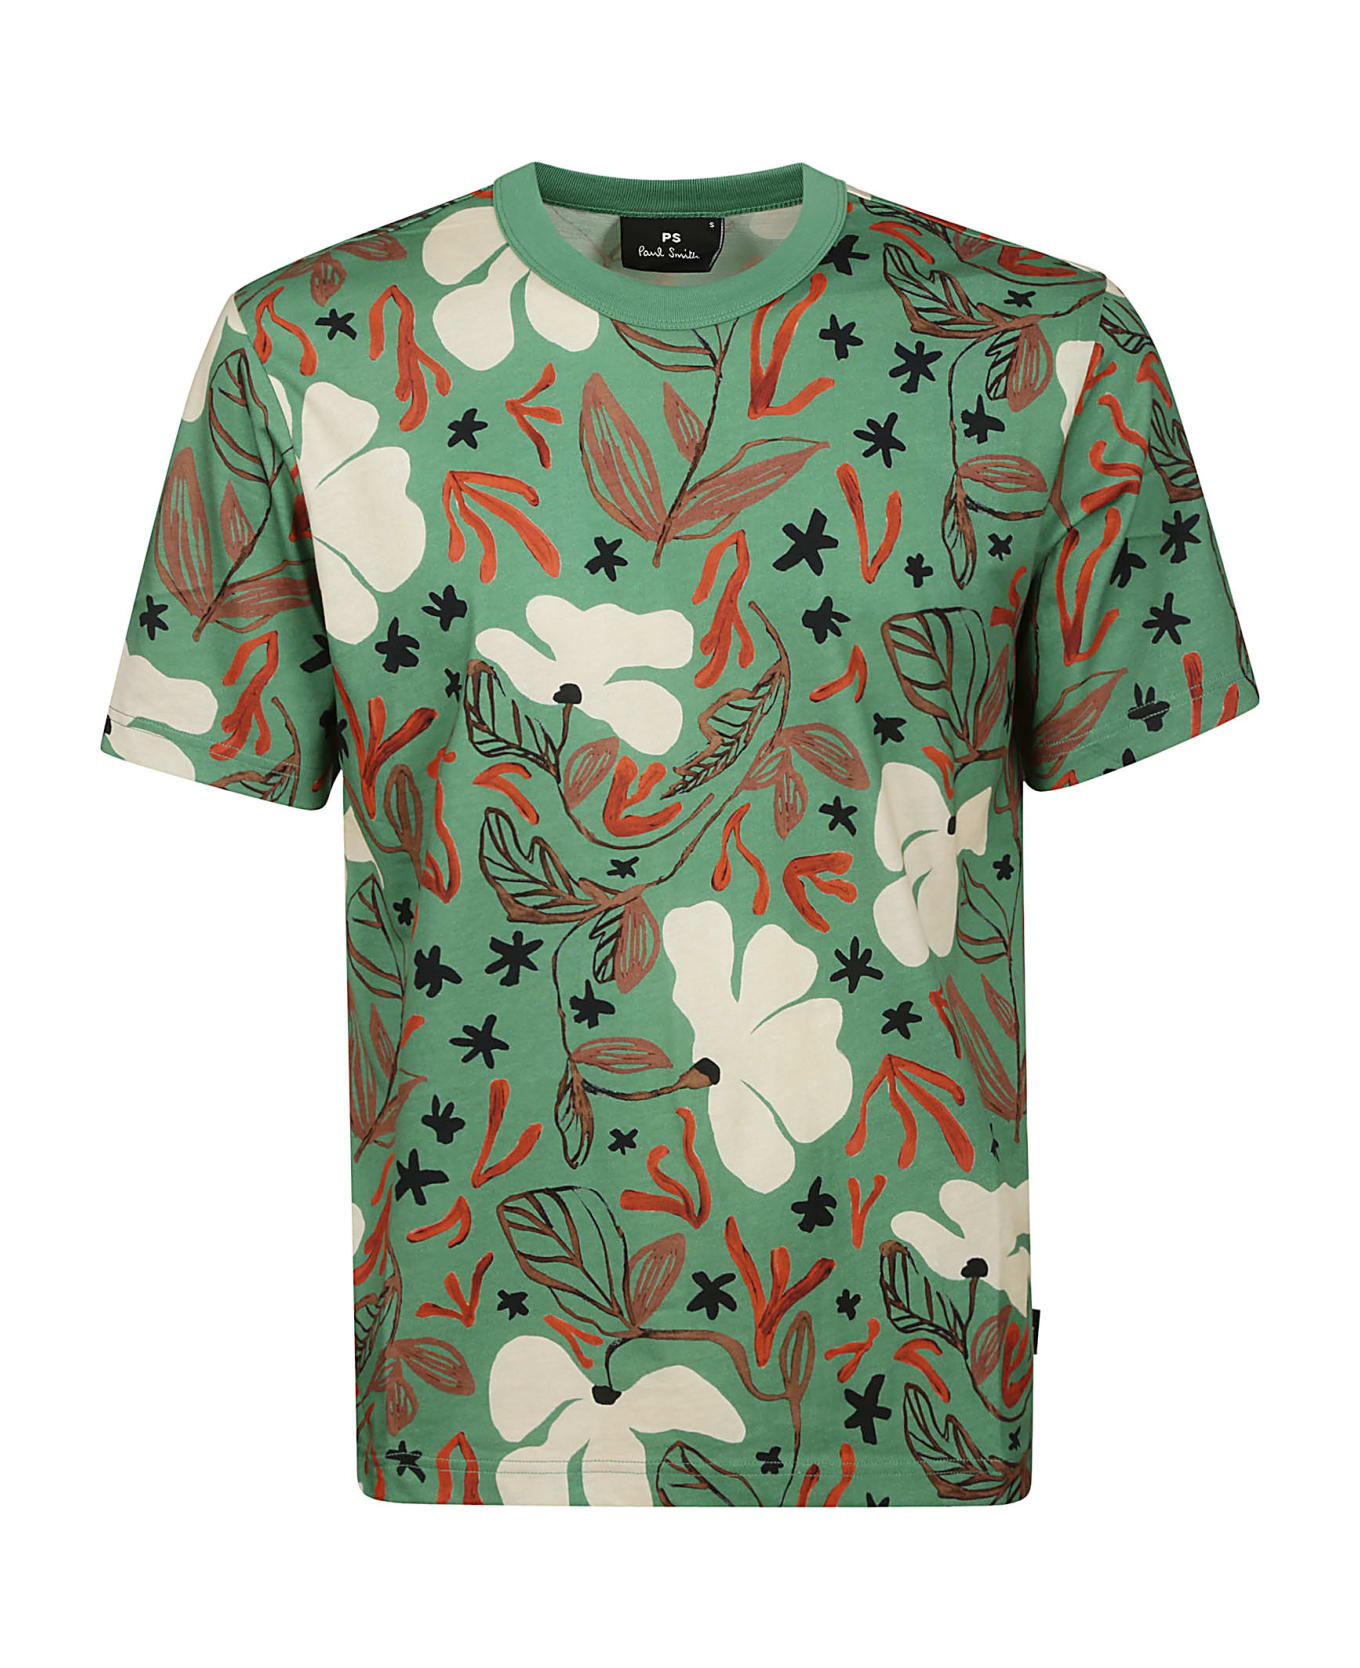 Paul Smith Ss T Shirt Sea Floral - Emerald Green